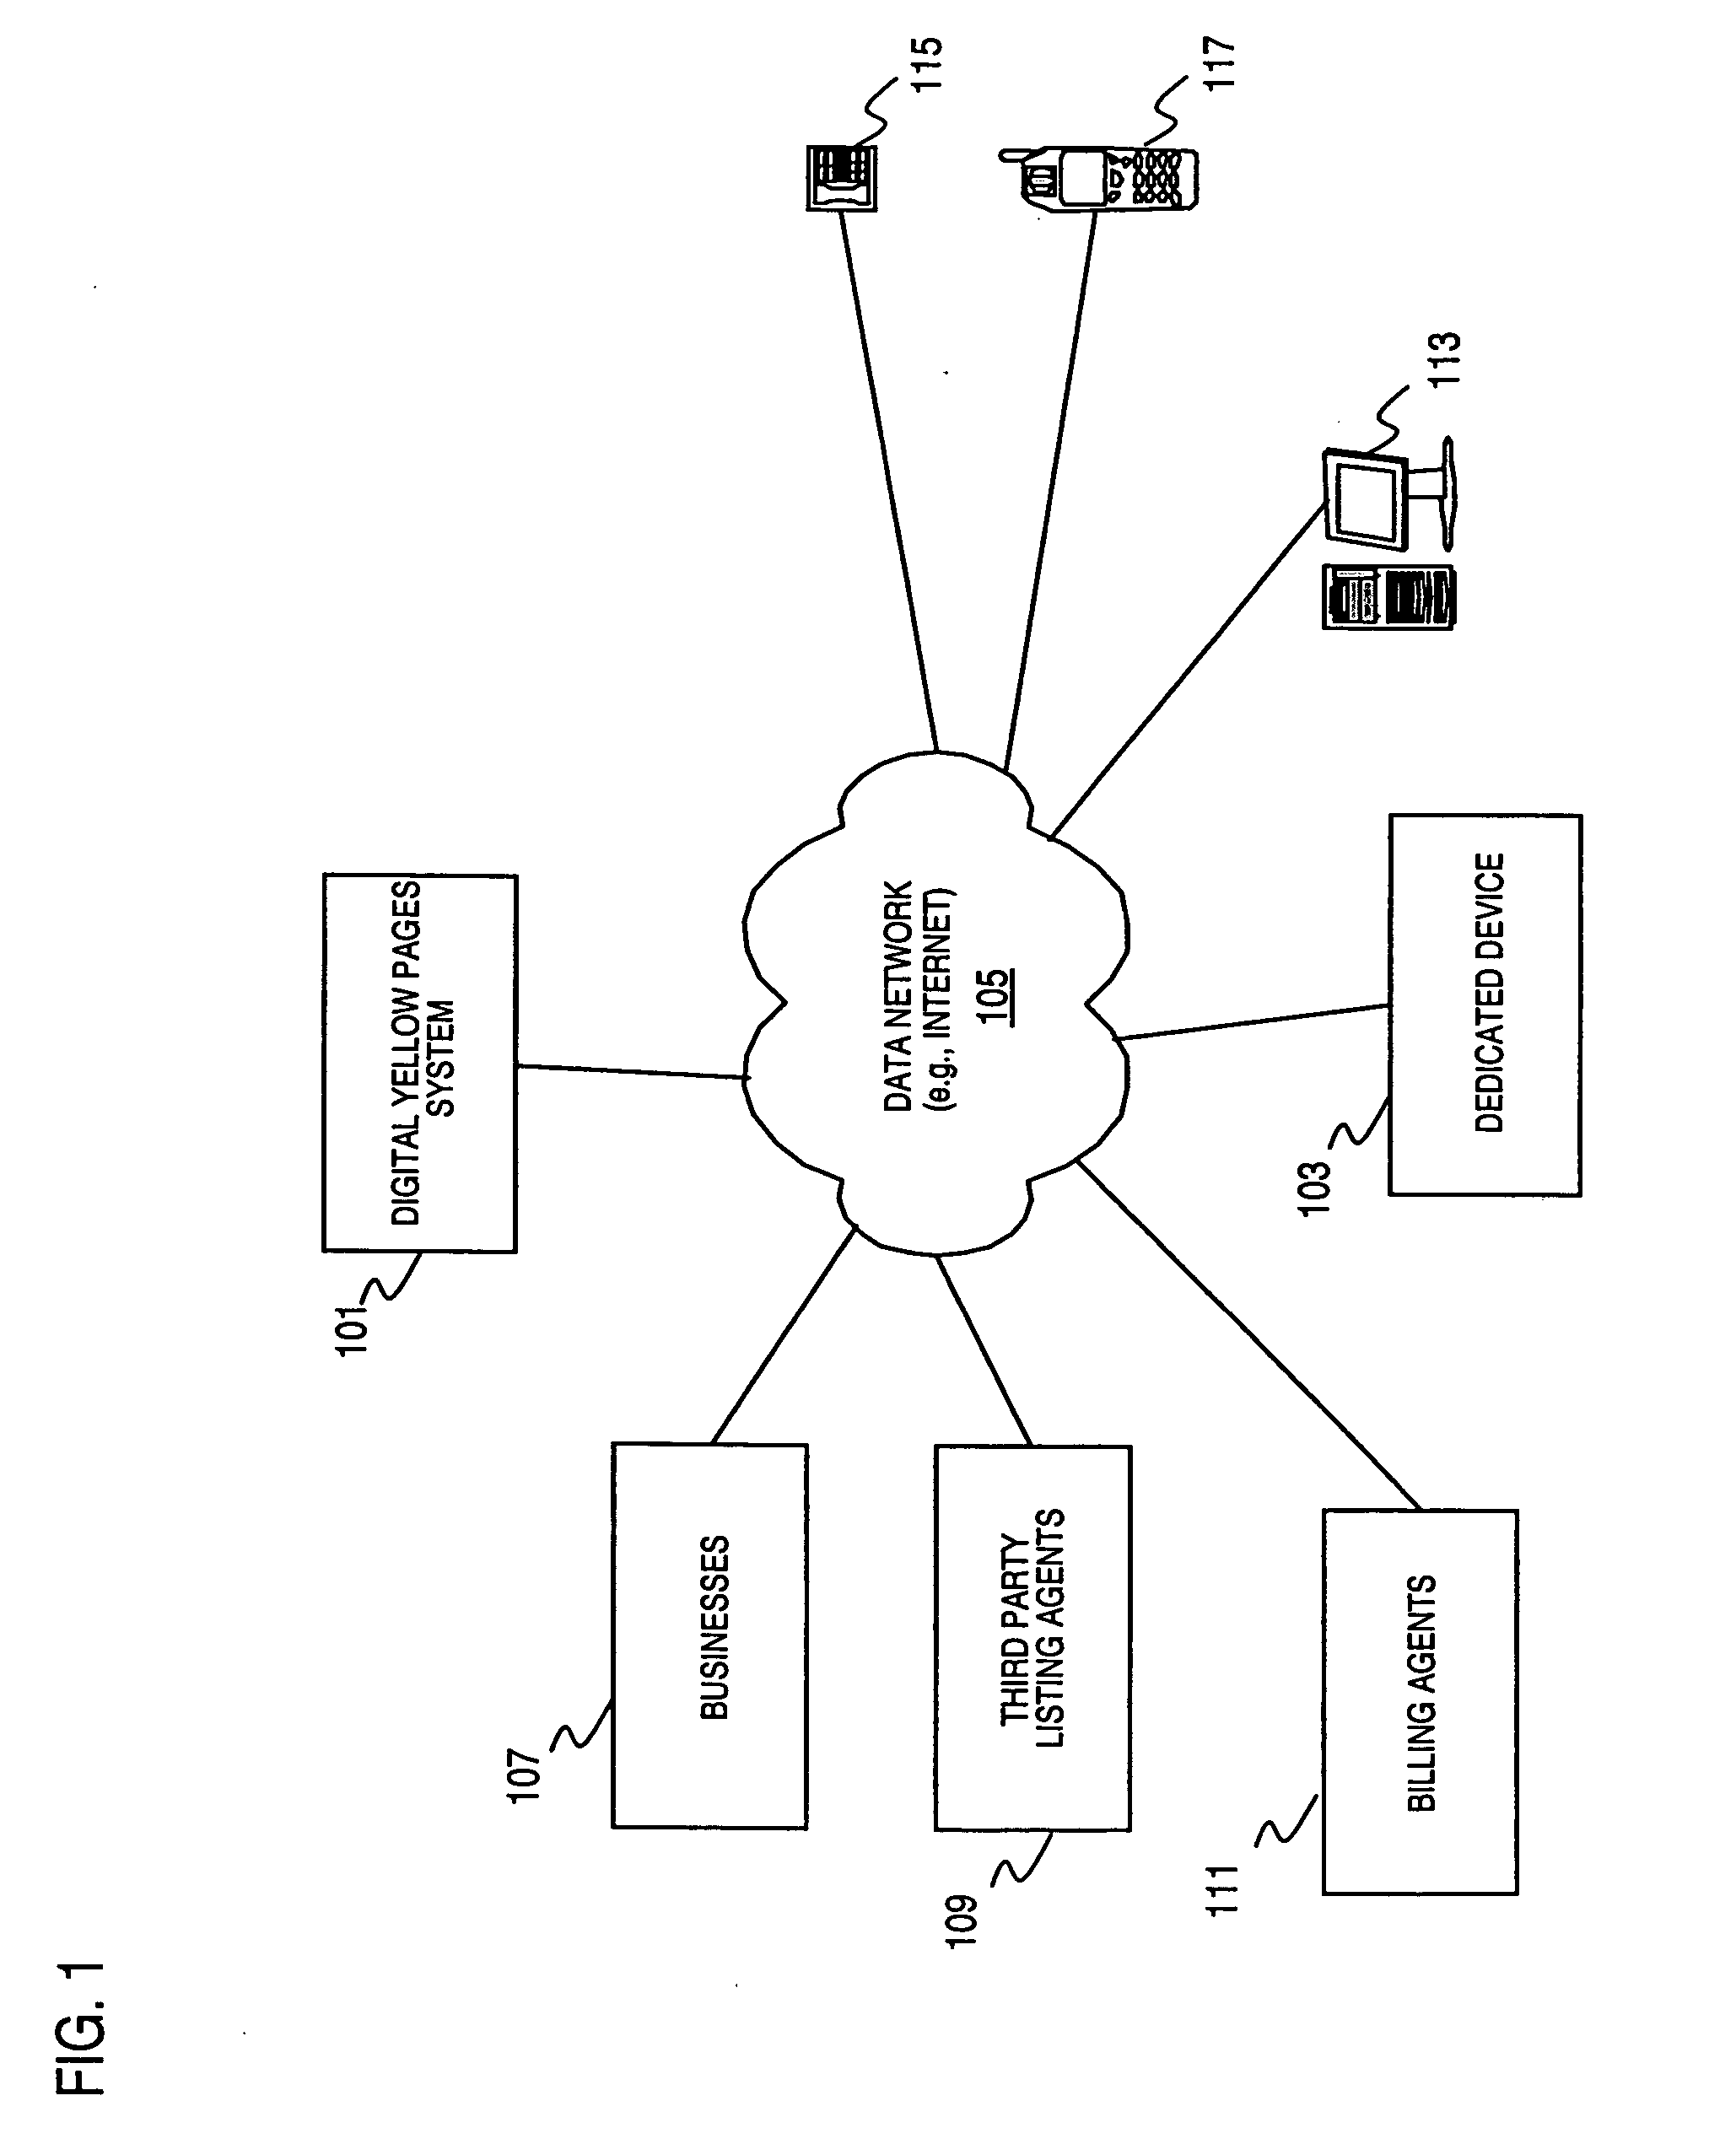 Method and system for providing interactive business directory services